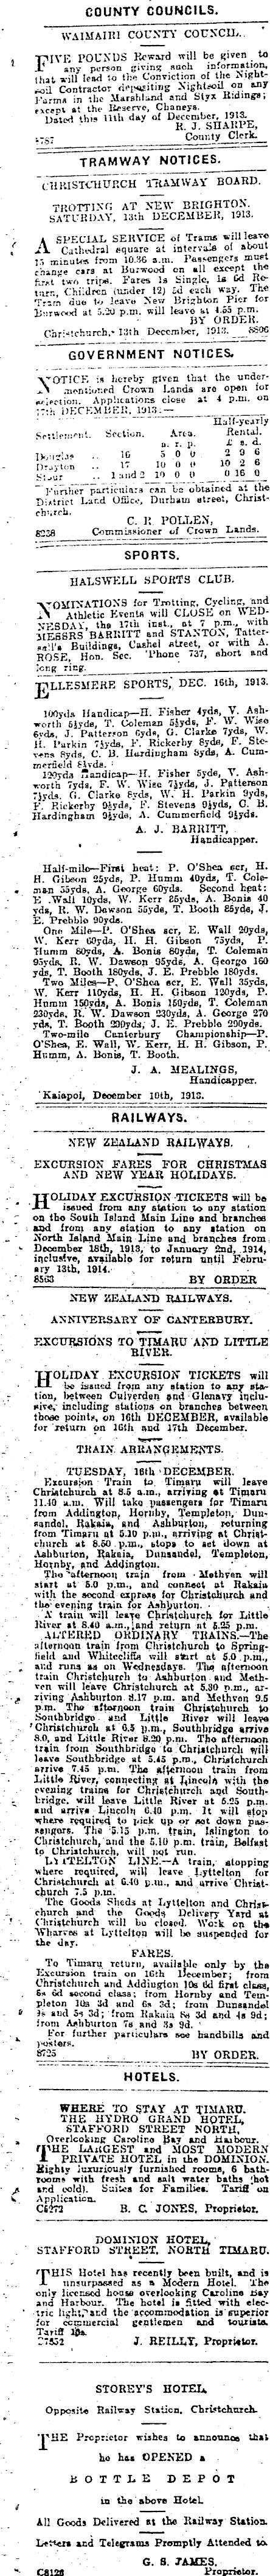 Papers Past Newspapers Press 13 December 1913 Page 18 Advertisements Column 1